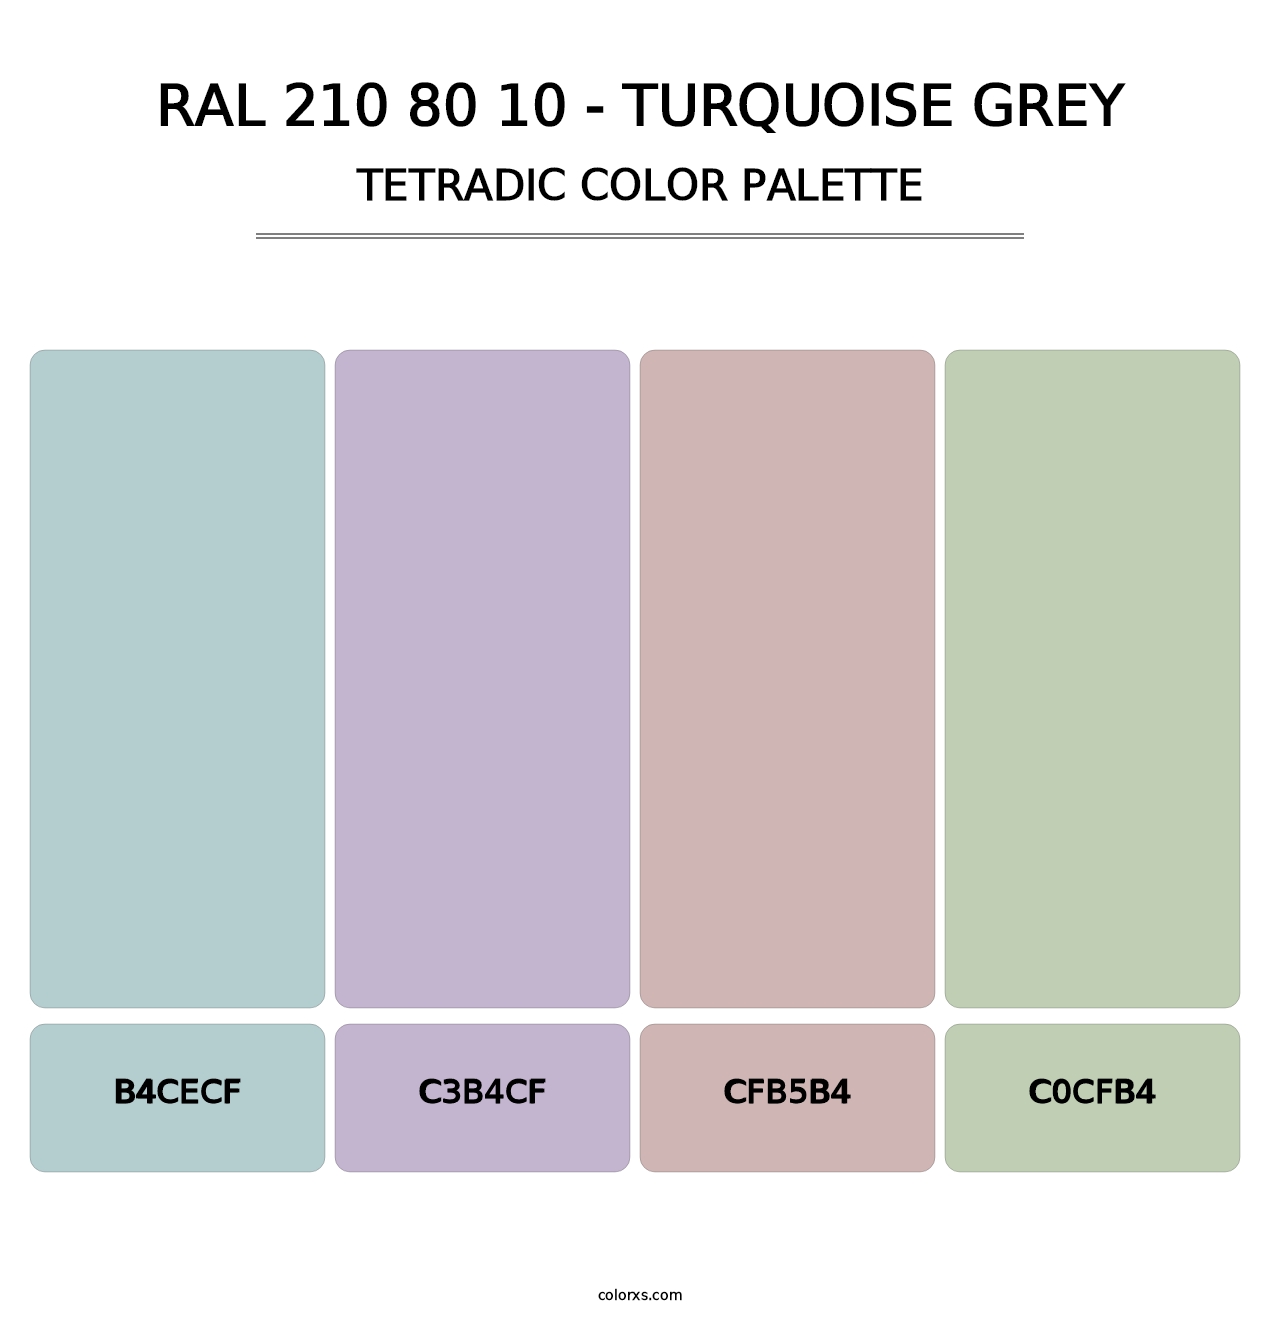 RAL 210 80 10 - Turquoise Grey - Tetradic Color Palette